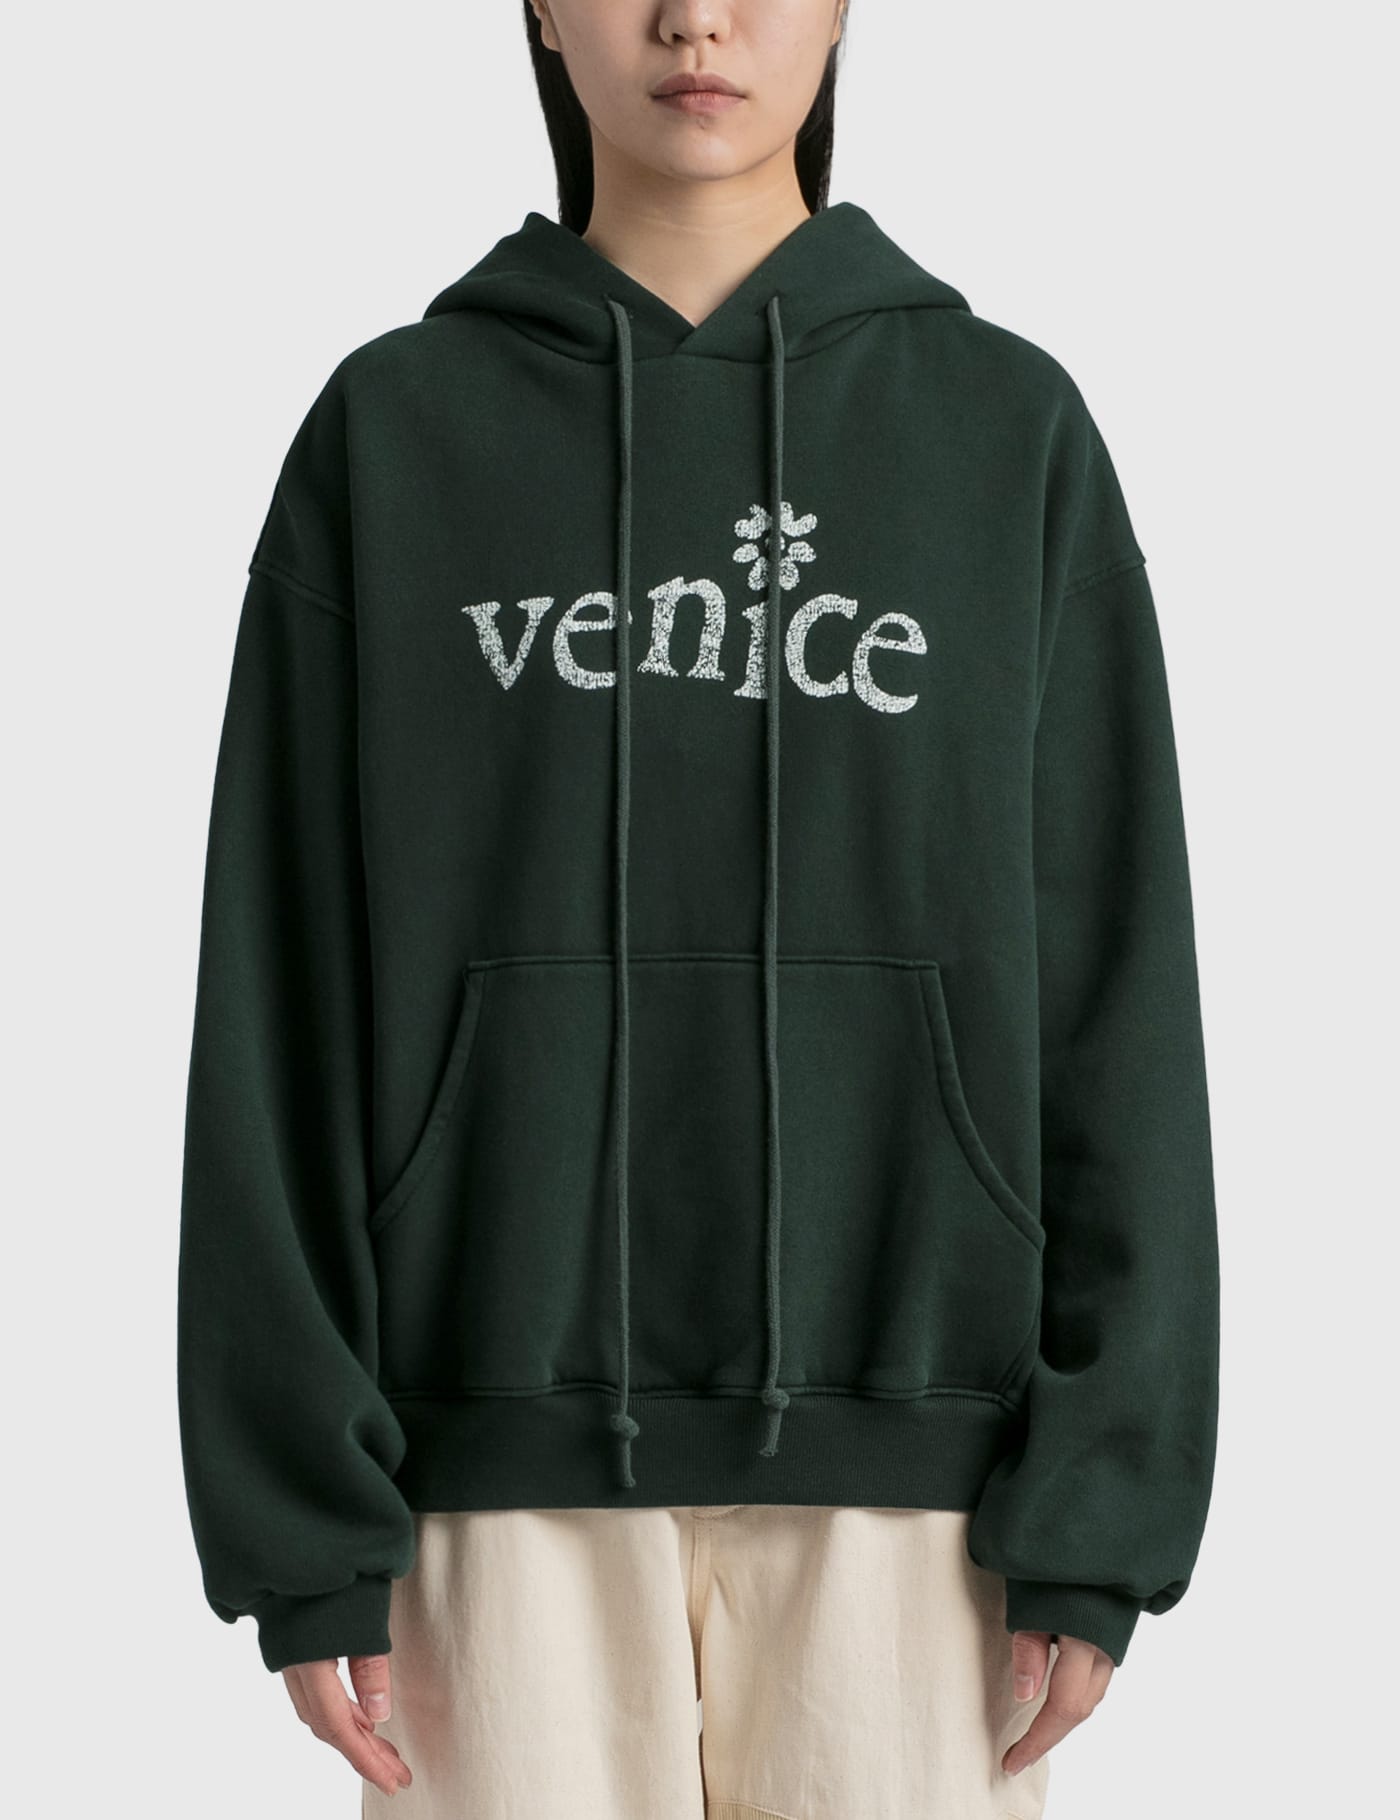 ERL - Venice Hoodie | HBX - Globally Curated Fashion and Lifestyle